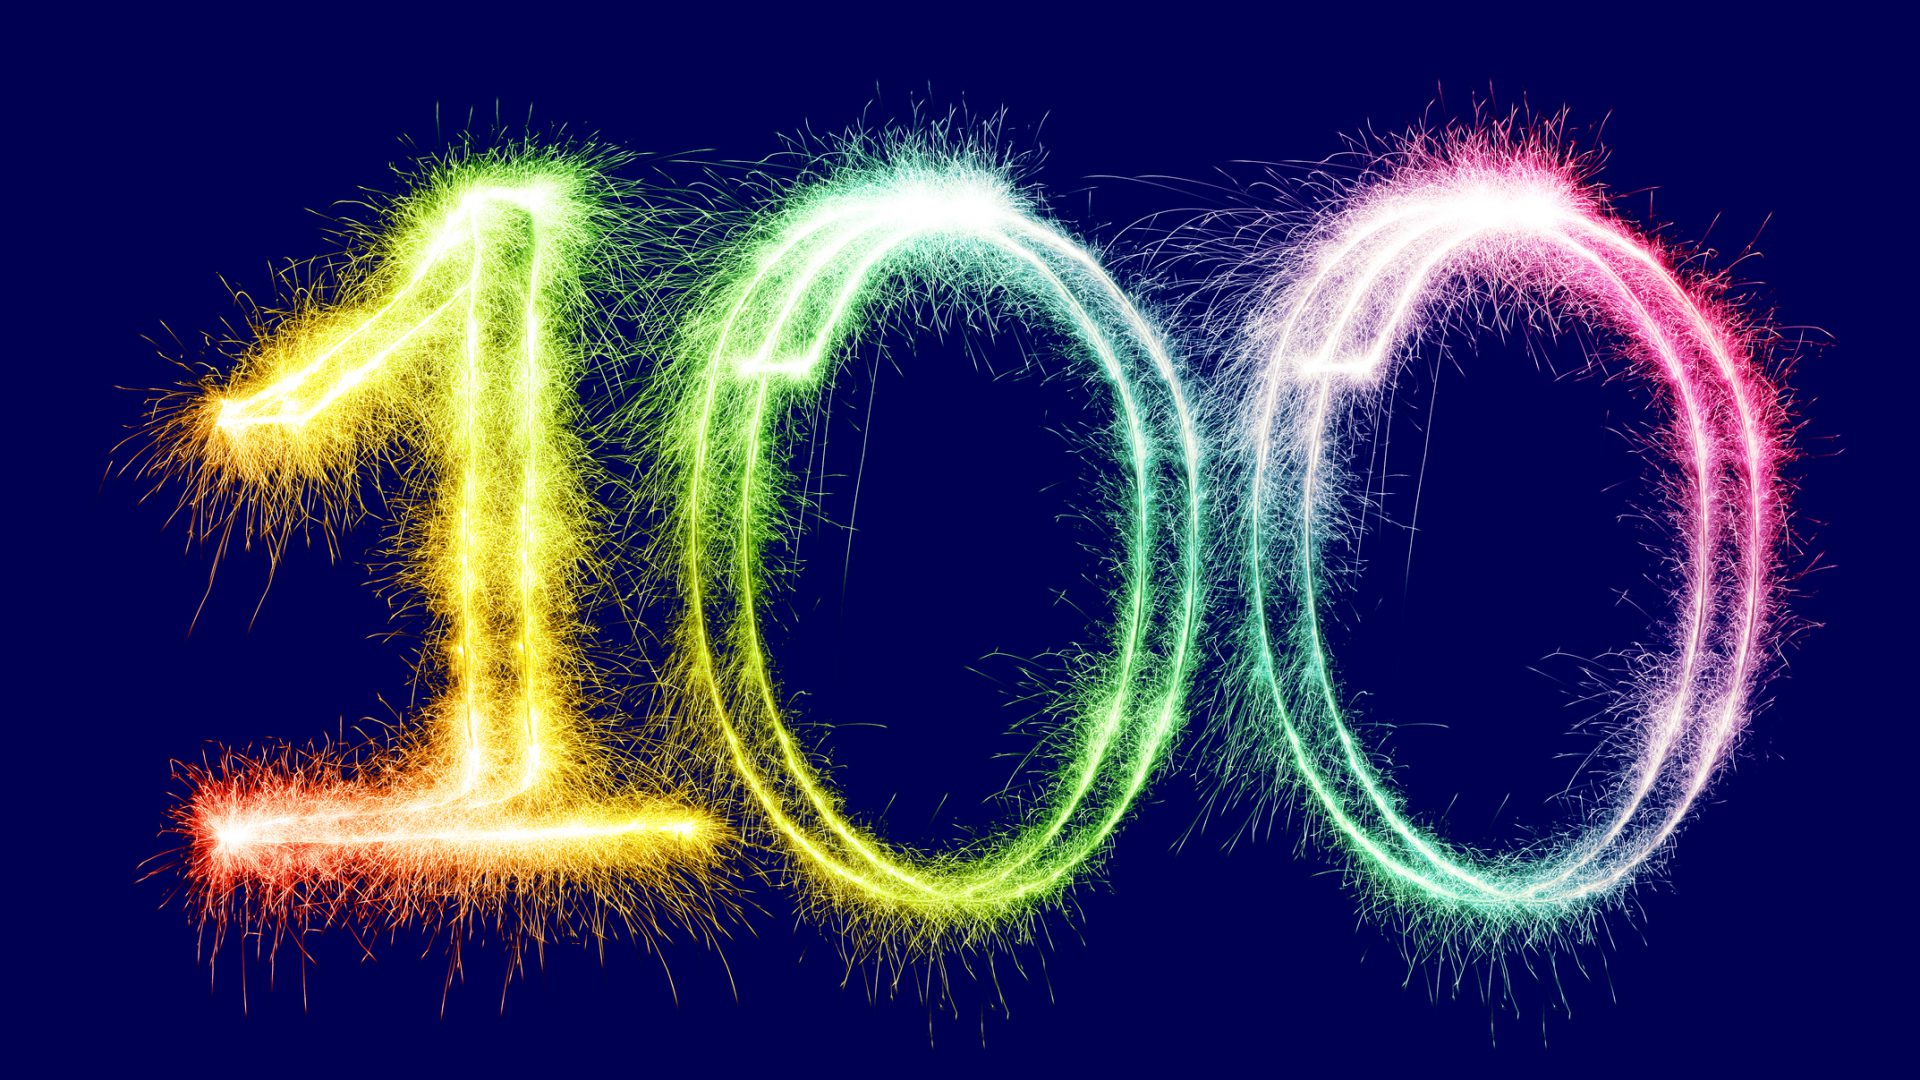 "Sparkling multi colored number 100 on a blue background. Can be used for birthdays, anniversaries."